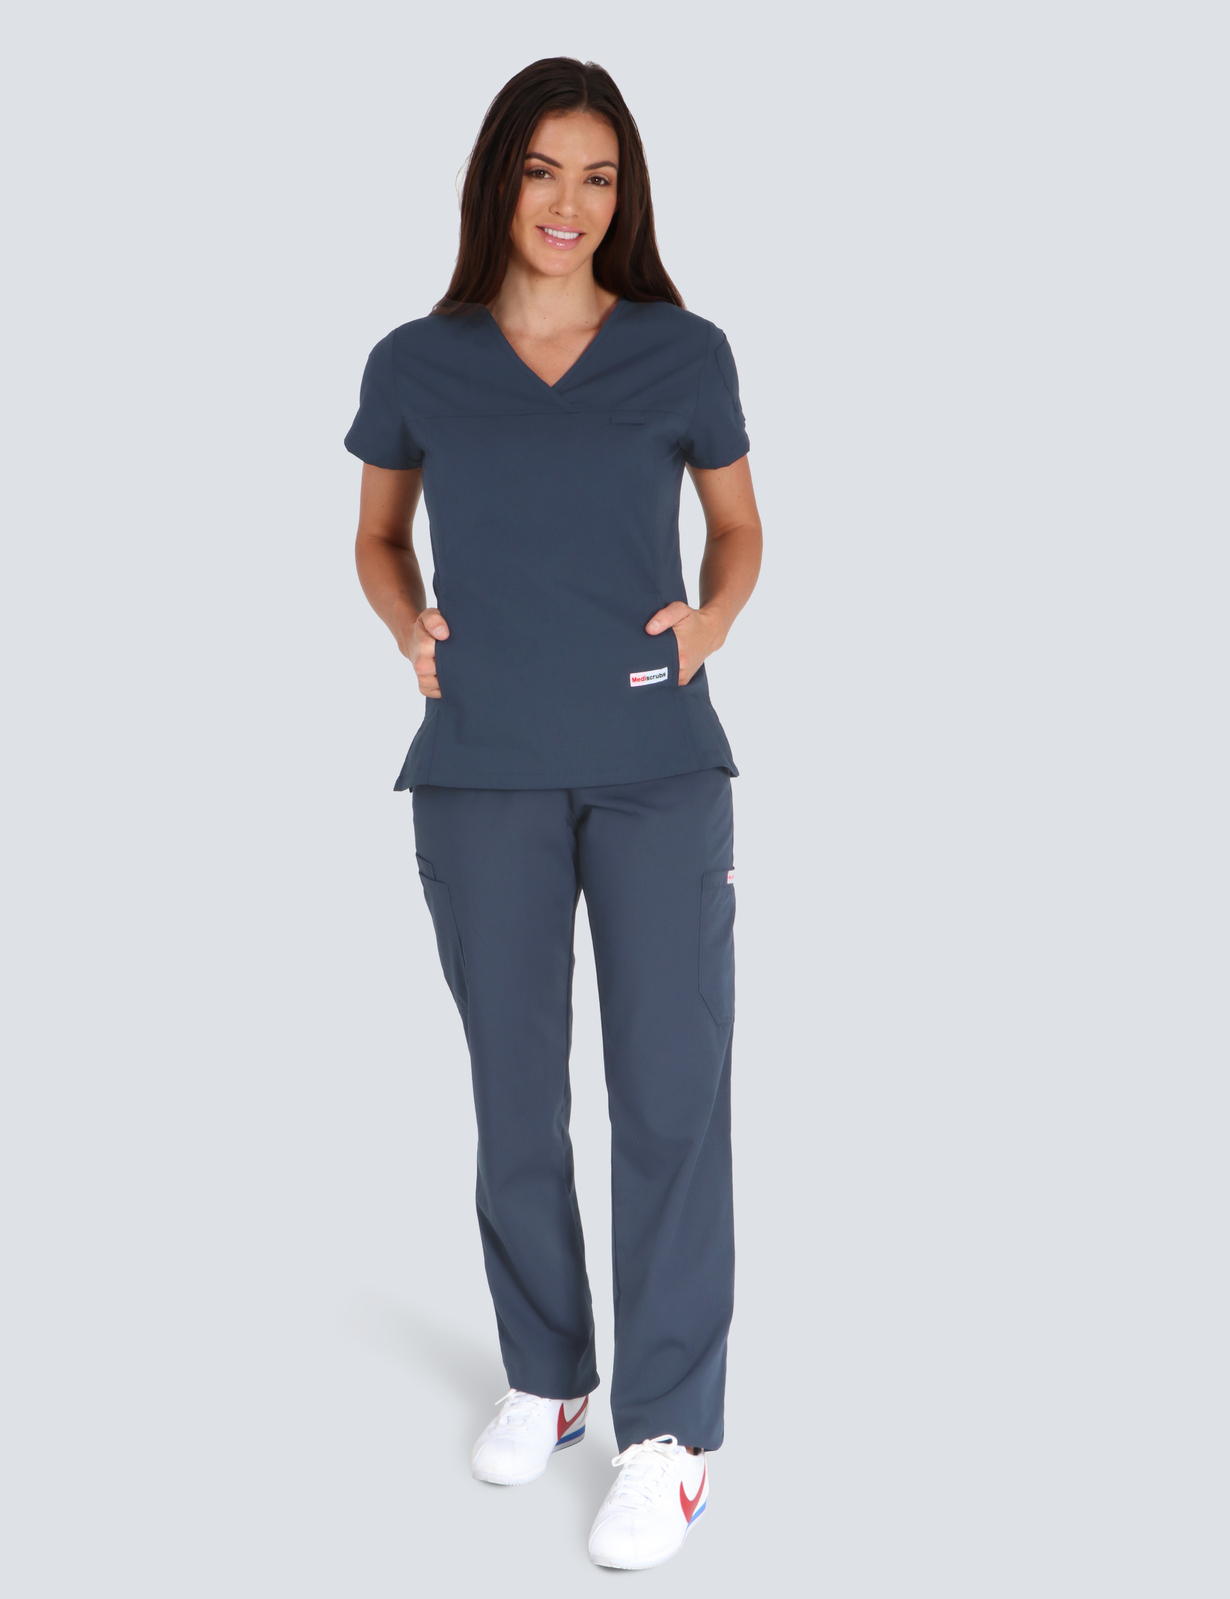 SCPU Hospital - Registered Nurse (Women's Fit Solid Scrub Top and